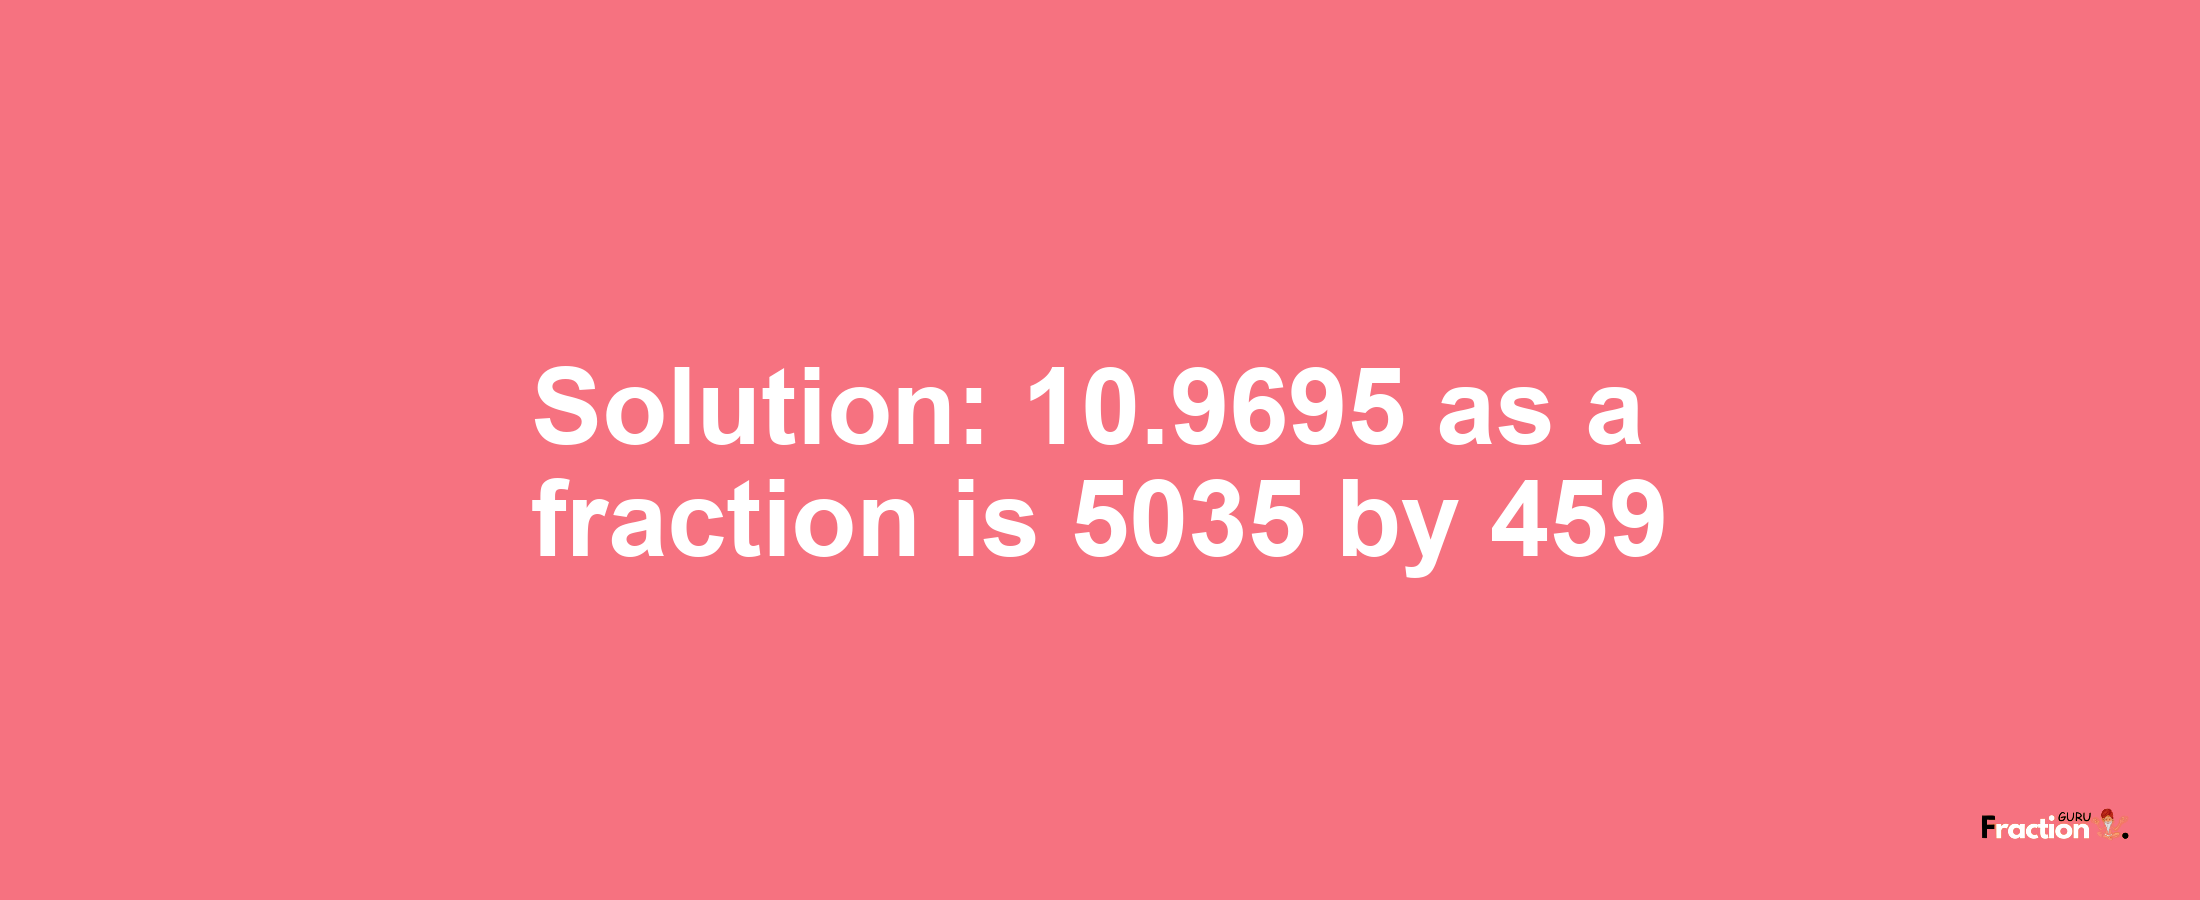 Solution:10.9695 as a fraction is 5035/459